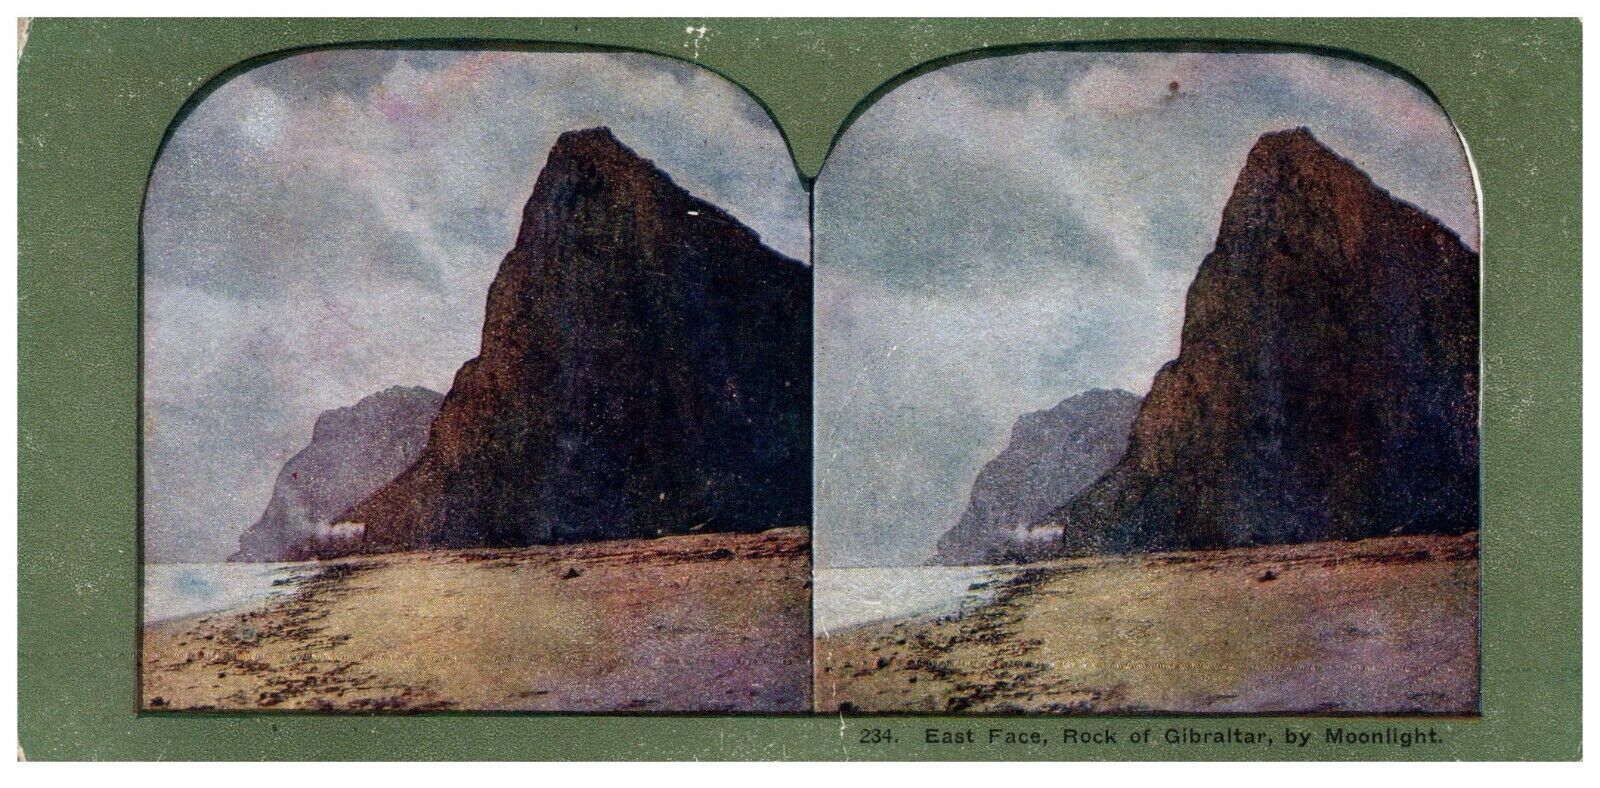 STEREOSCOPE THE ROCK OF GIBRALTAR EAST FACE BY MOONLIGHT CARD 234